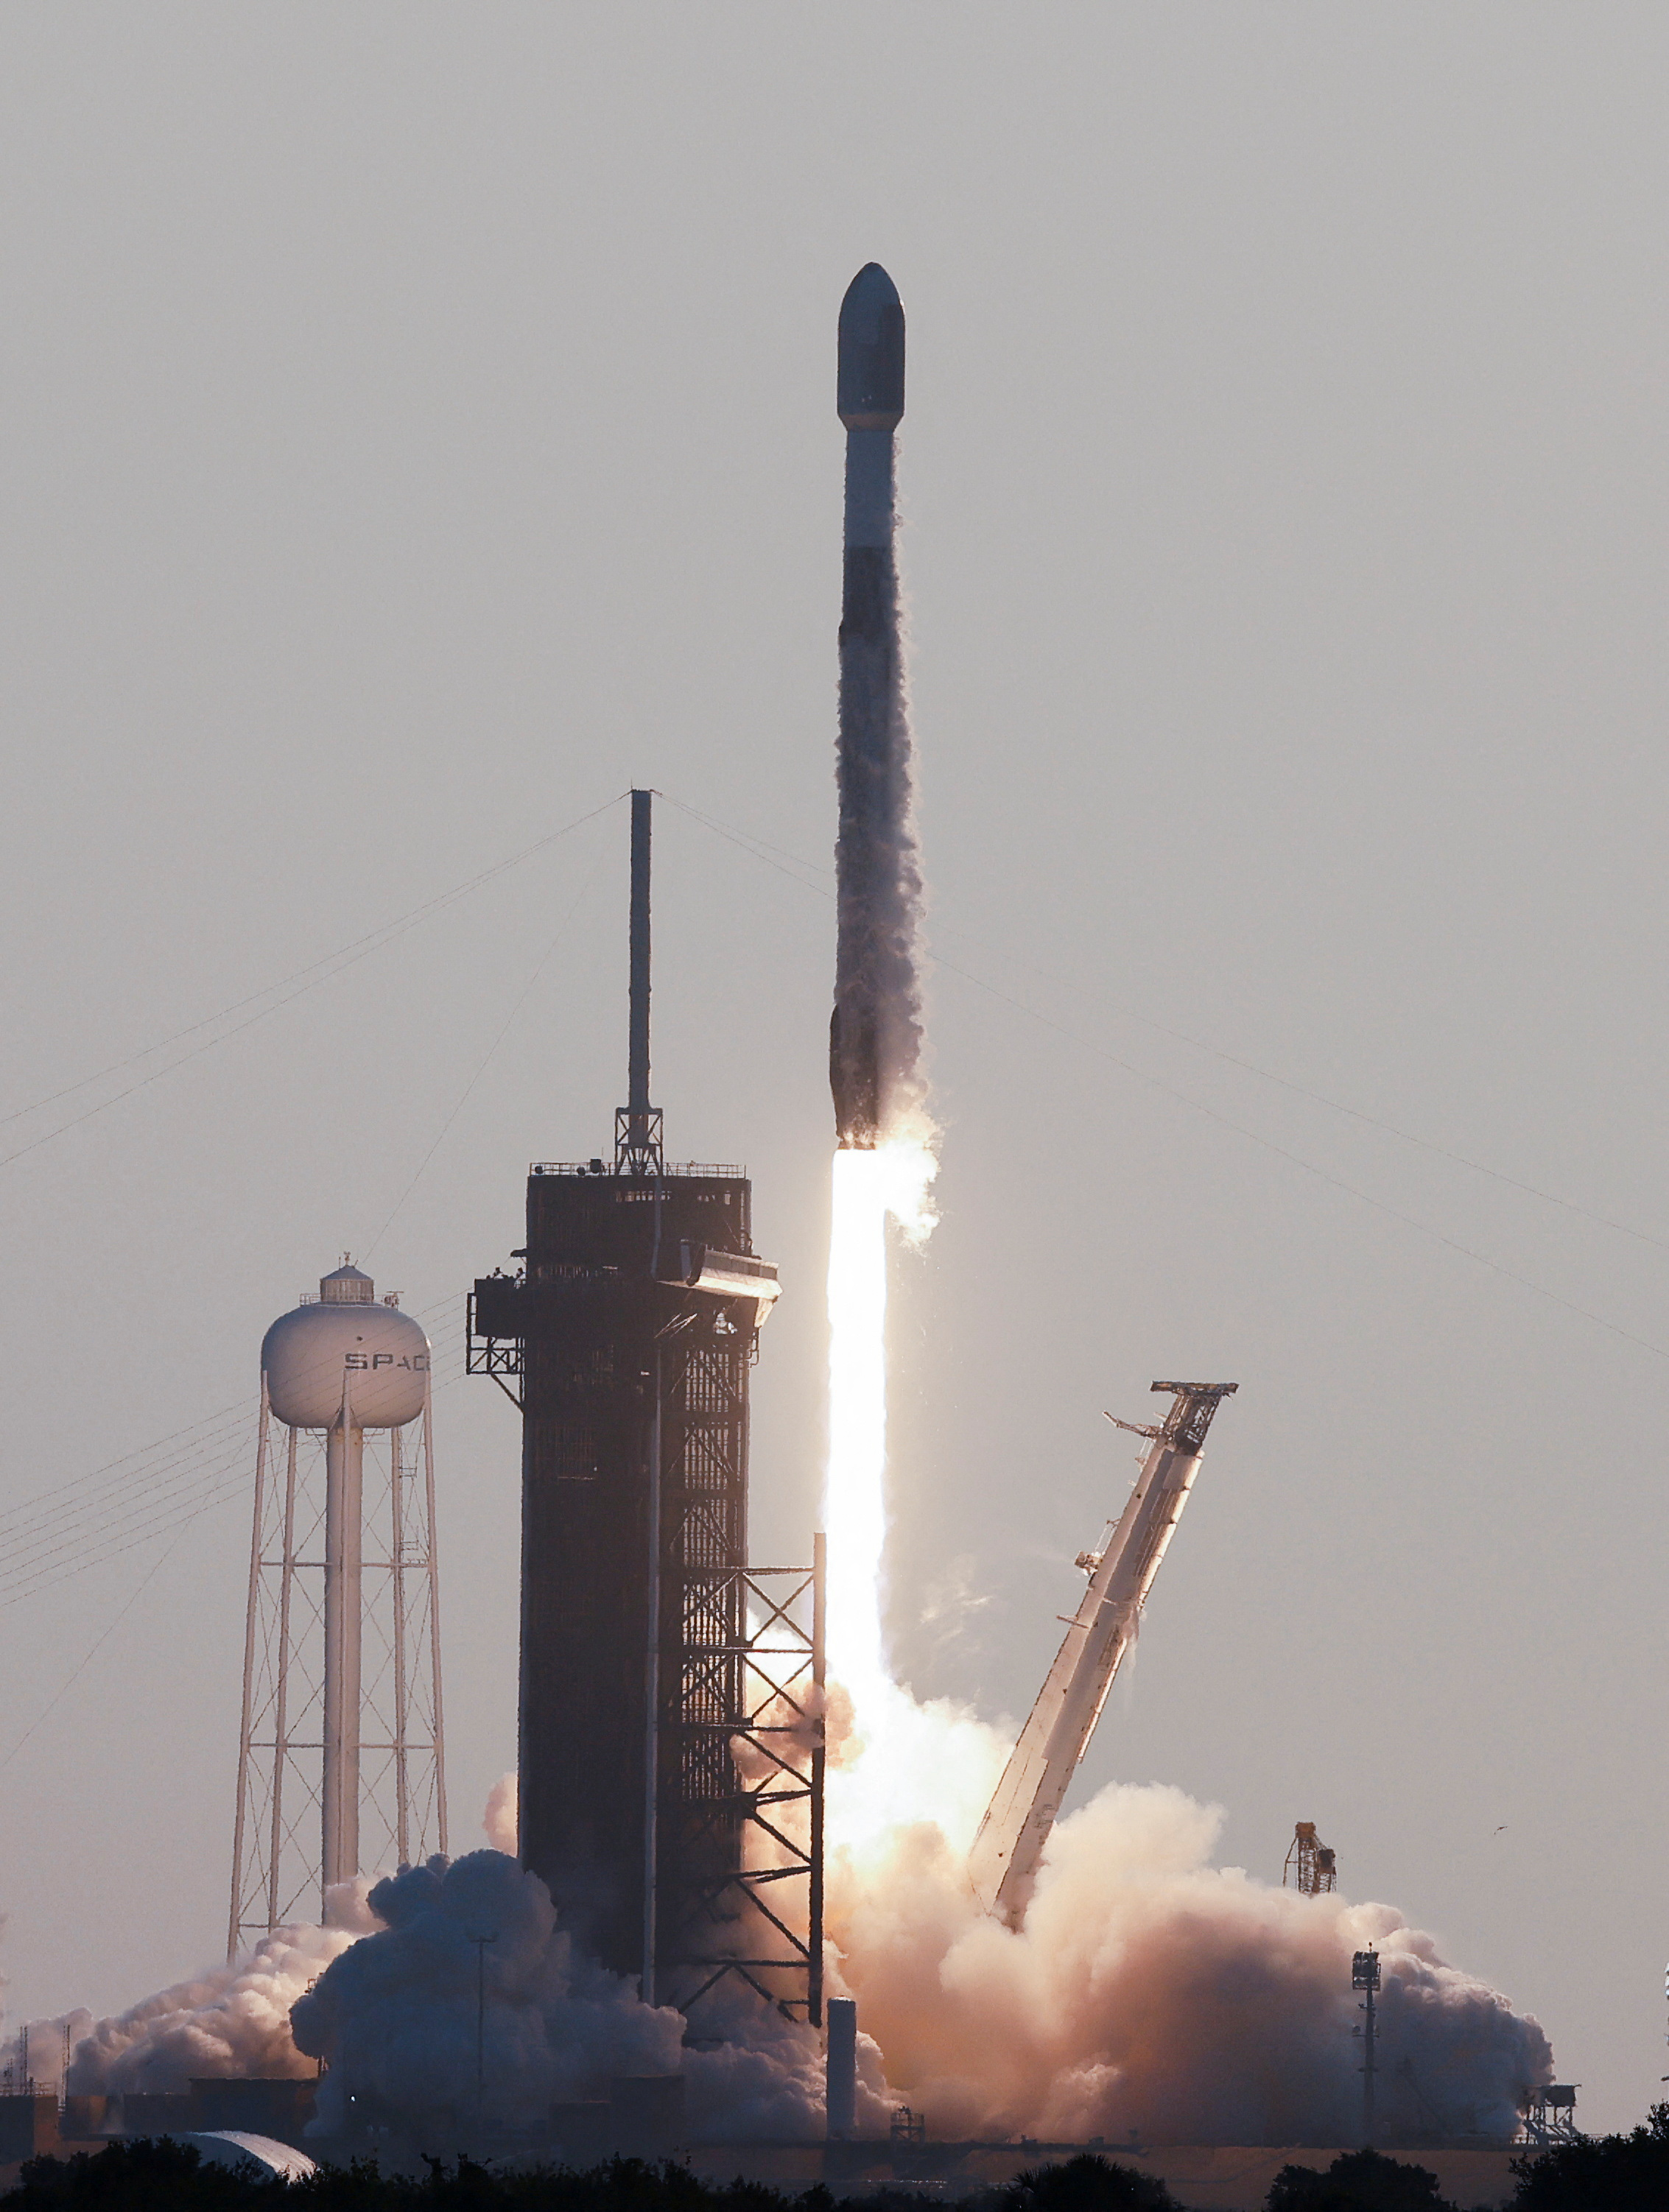 A SpaceX Falcon 9 rocket lifts off, carrying 53 Starlink internet satellites, from the Kennedy Space Center in Cape Canaveral